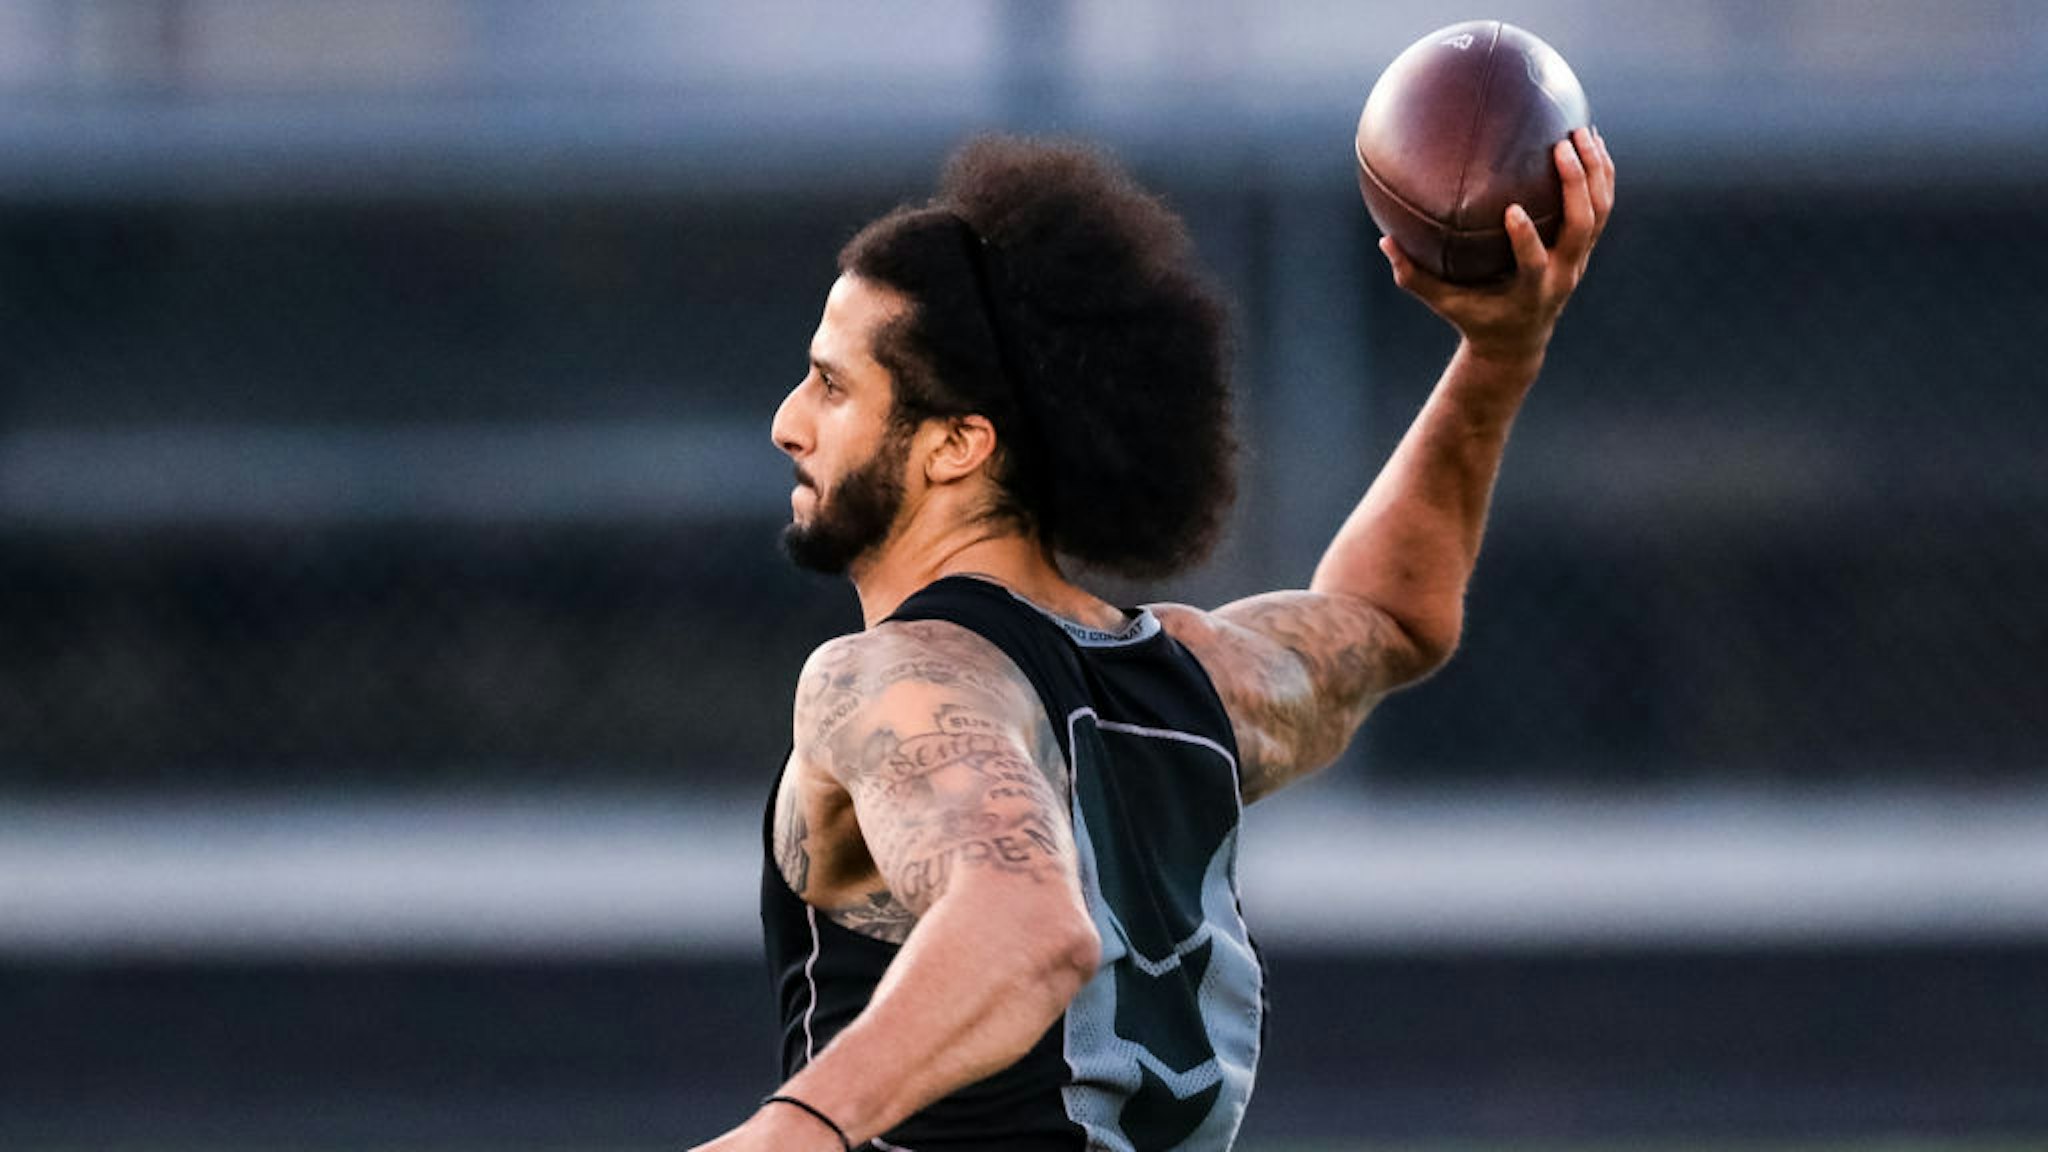 Colin Kaepernick looks to pass during his NFL workout held at Charles R Drew high school on November 16, 2019 in Riverdale, Georgia. (Photo by Carmen Mandato/Getty Images)